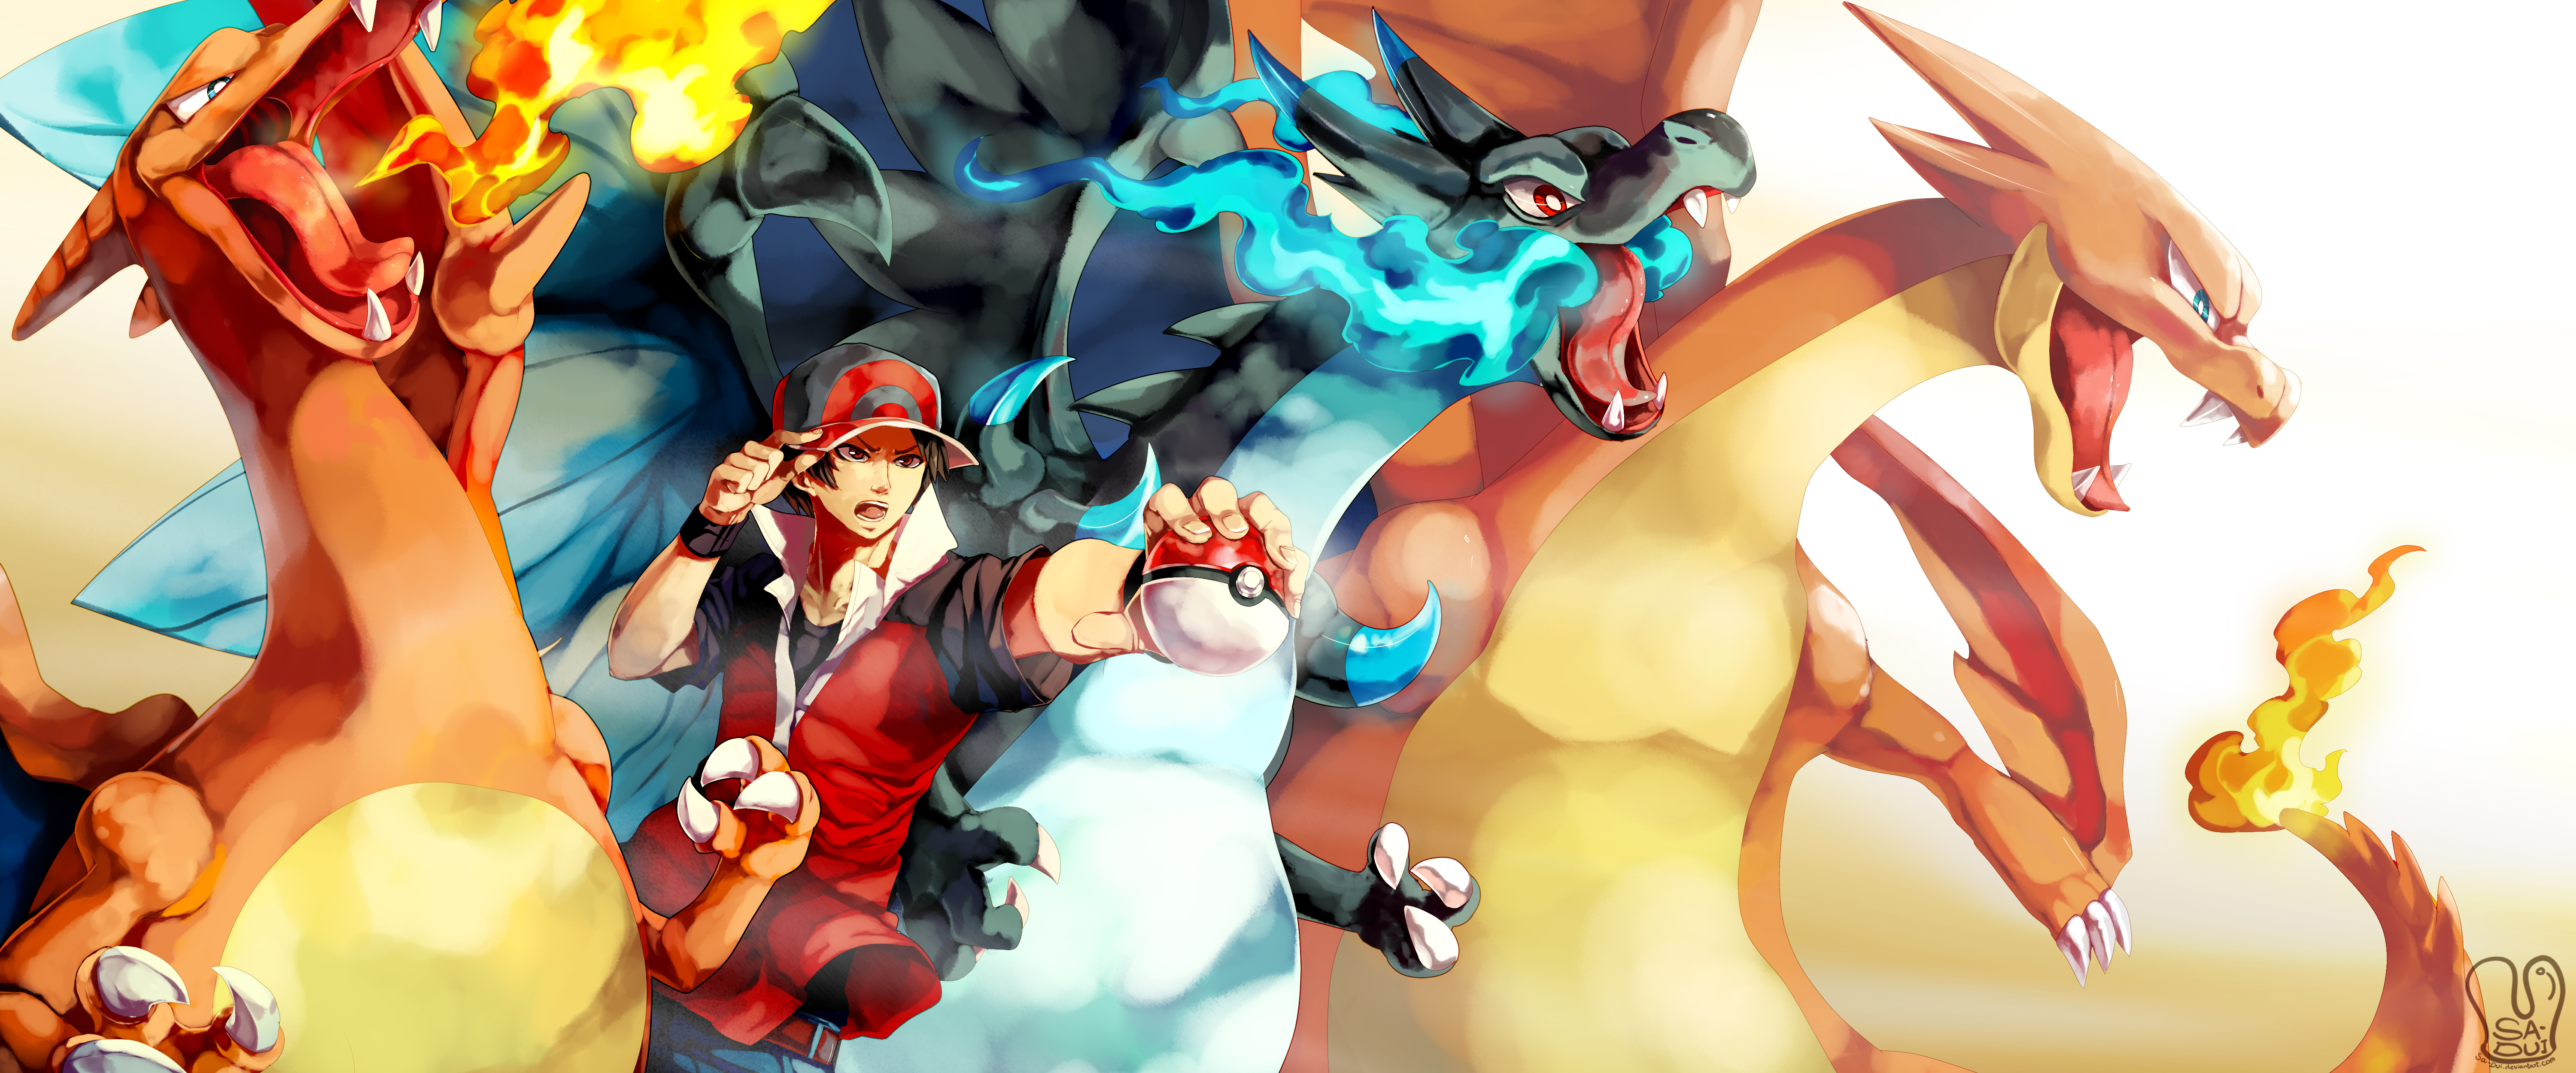 10+ Mega Charizard X (Pokémon) HD Wallpapers and Backgrounds